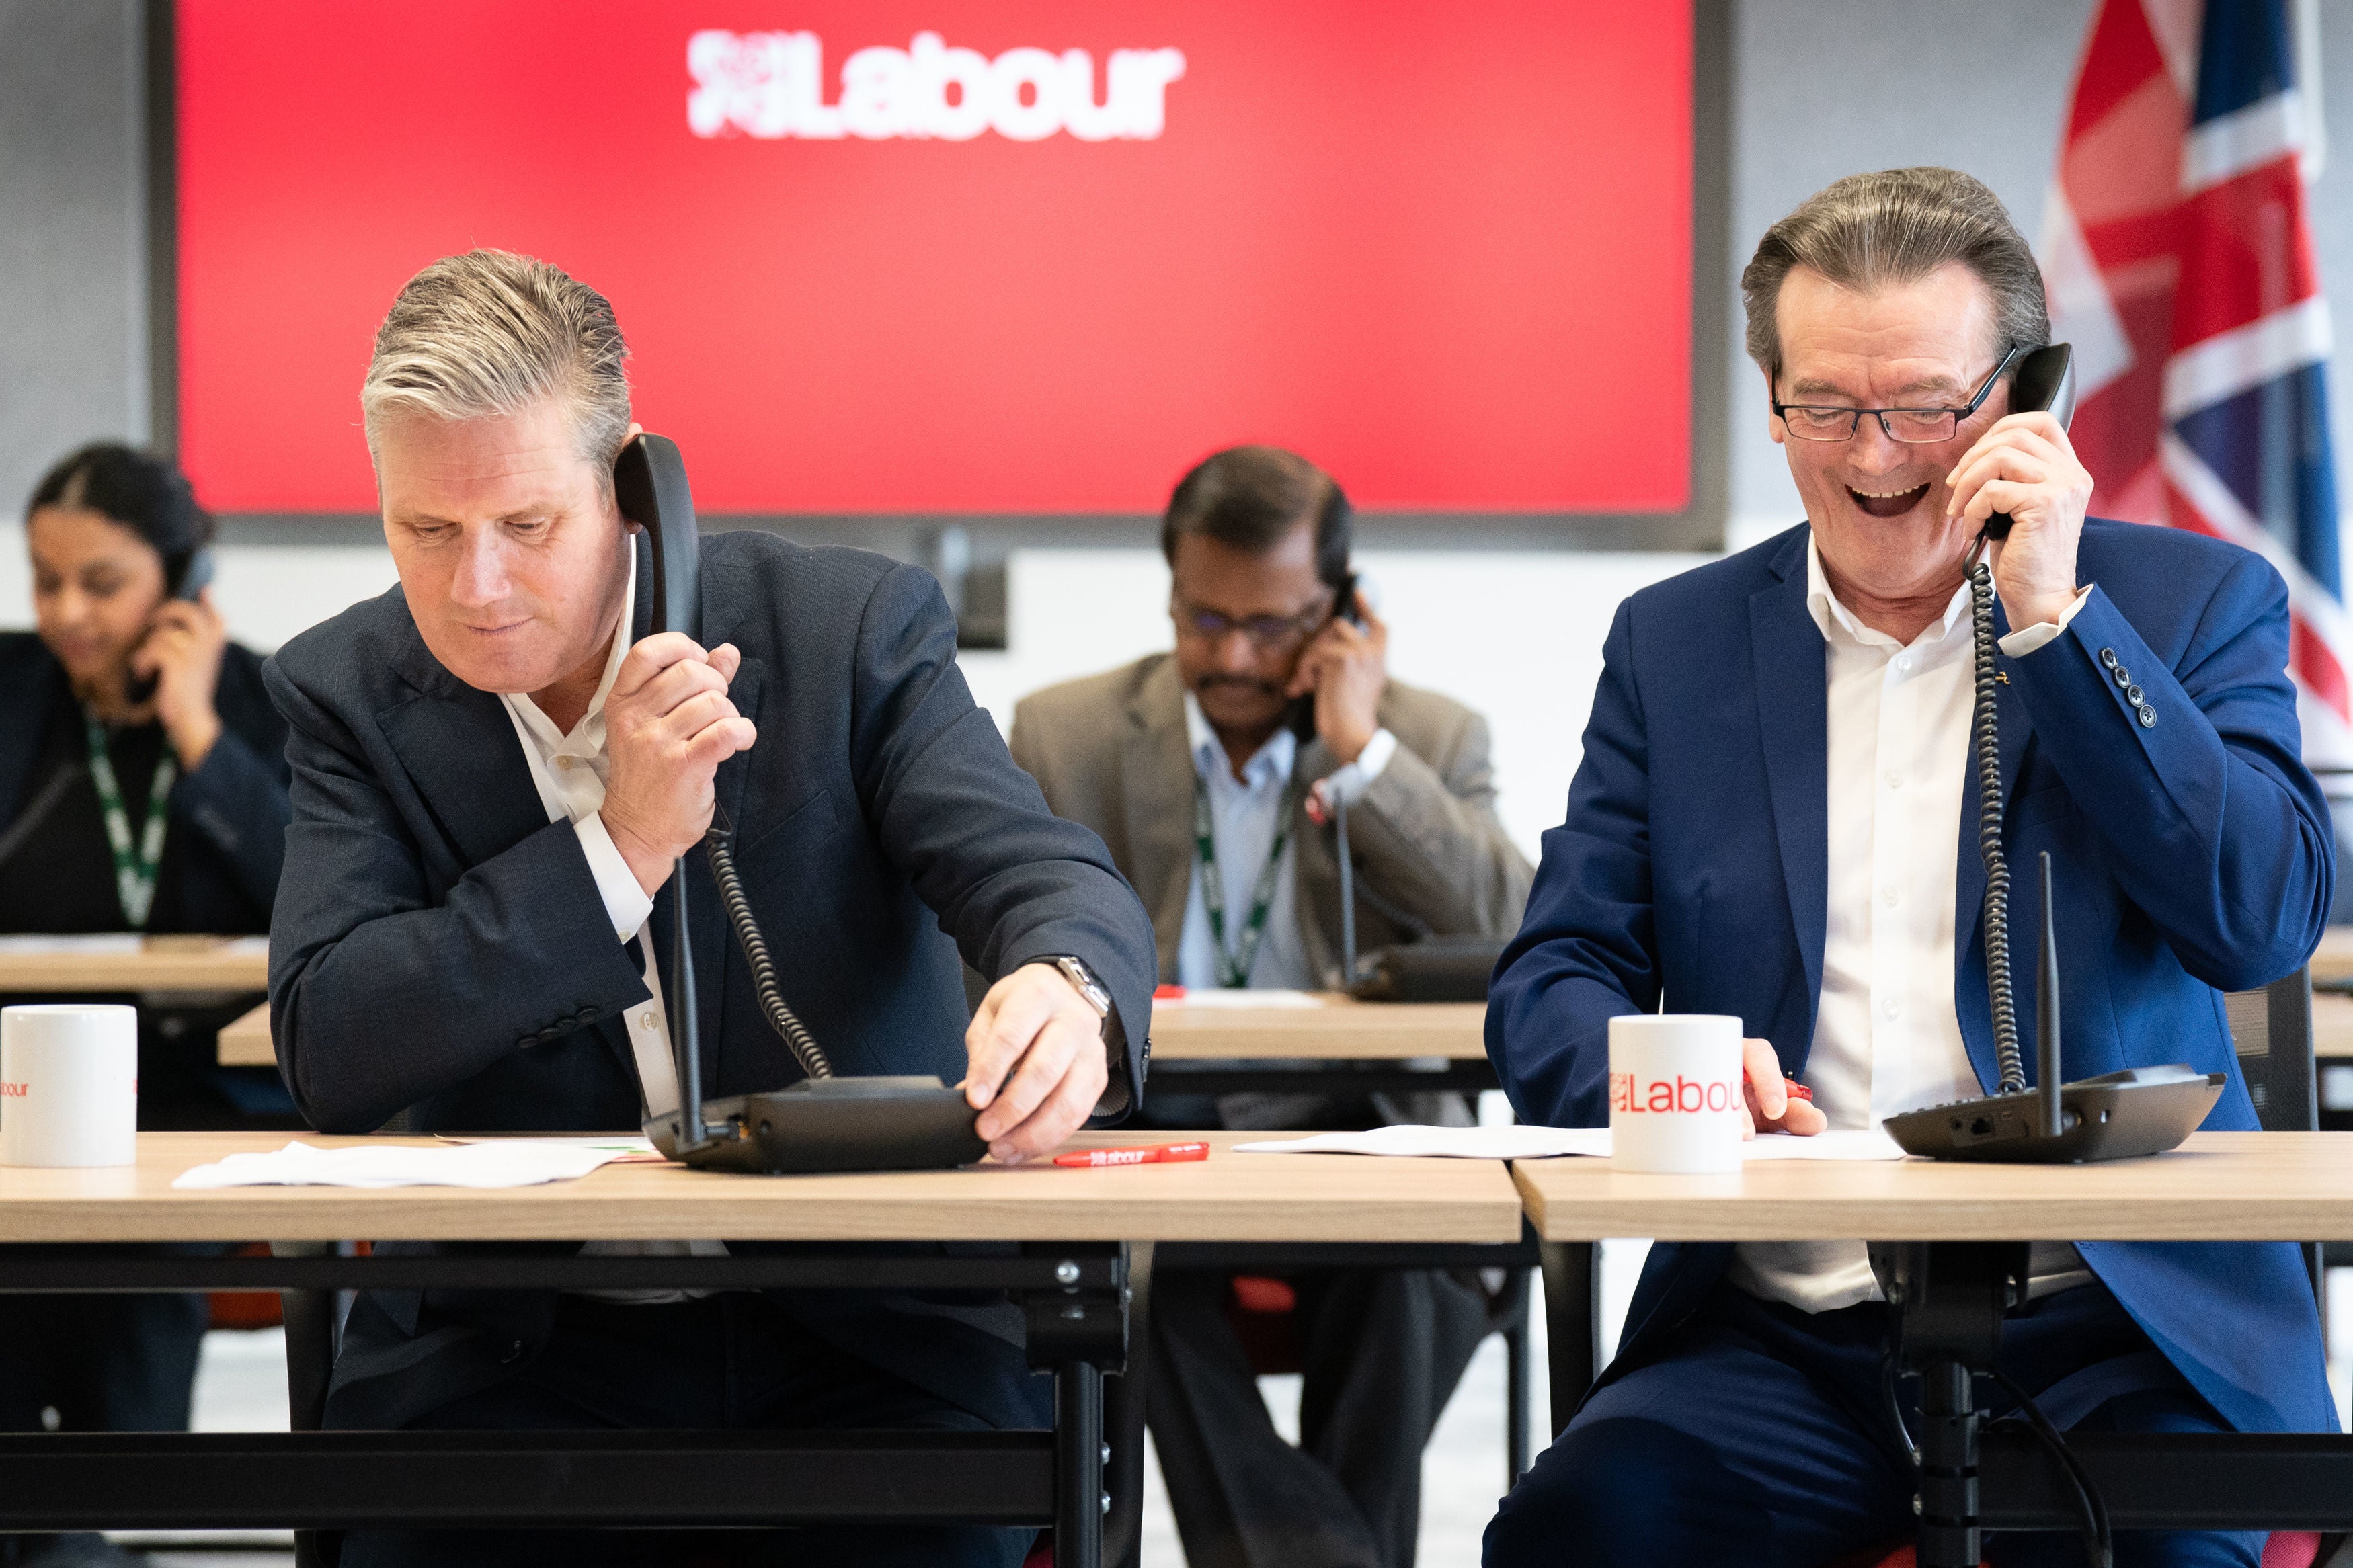 Labour leader Sir Keir Starmer (left) is joined by musician Feargal Sharkey canvassing voters by phone for the Wellingborough